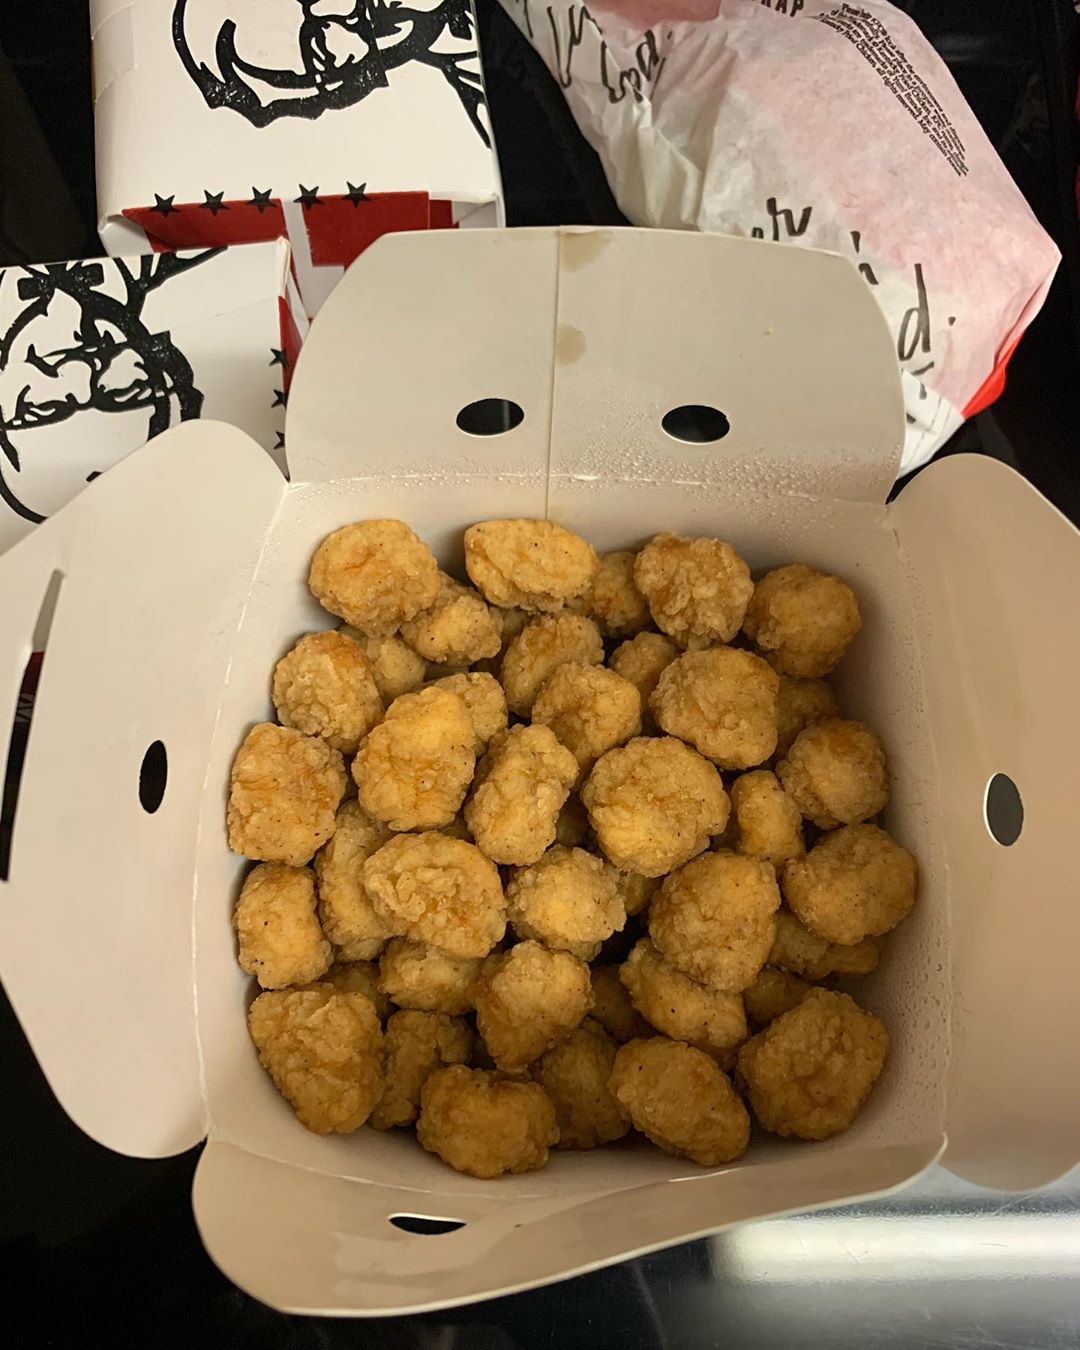 Dupes and alternatives to KFC Popcorn Chicken can be found online and in supermarkets for a quick fast food fix at home.